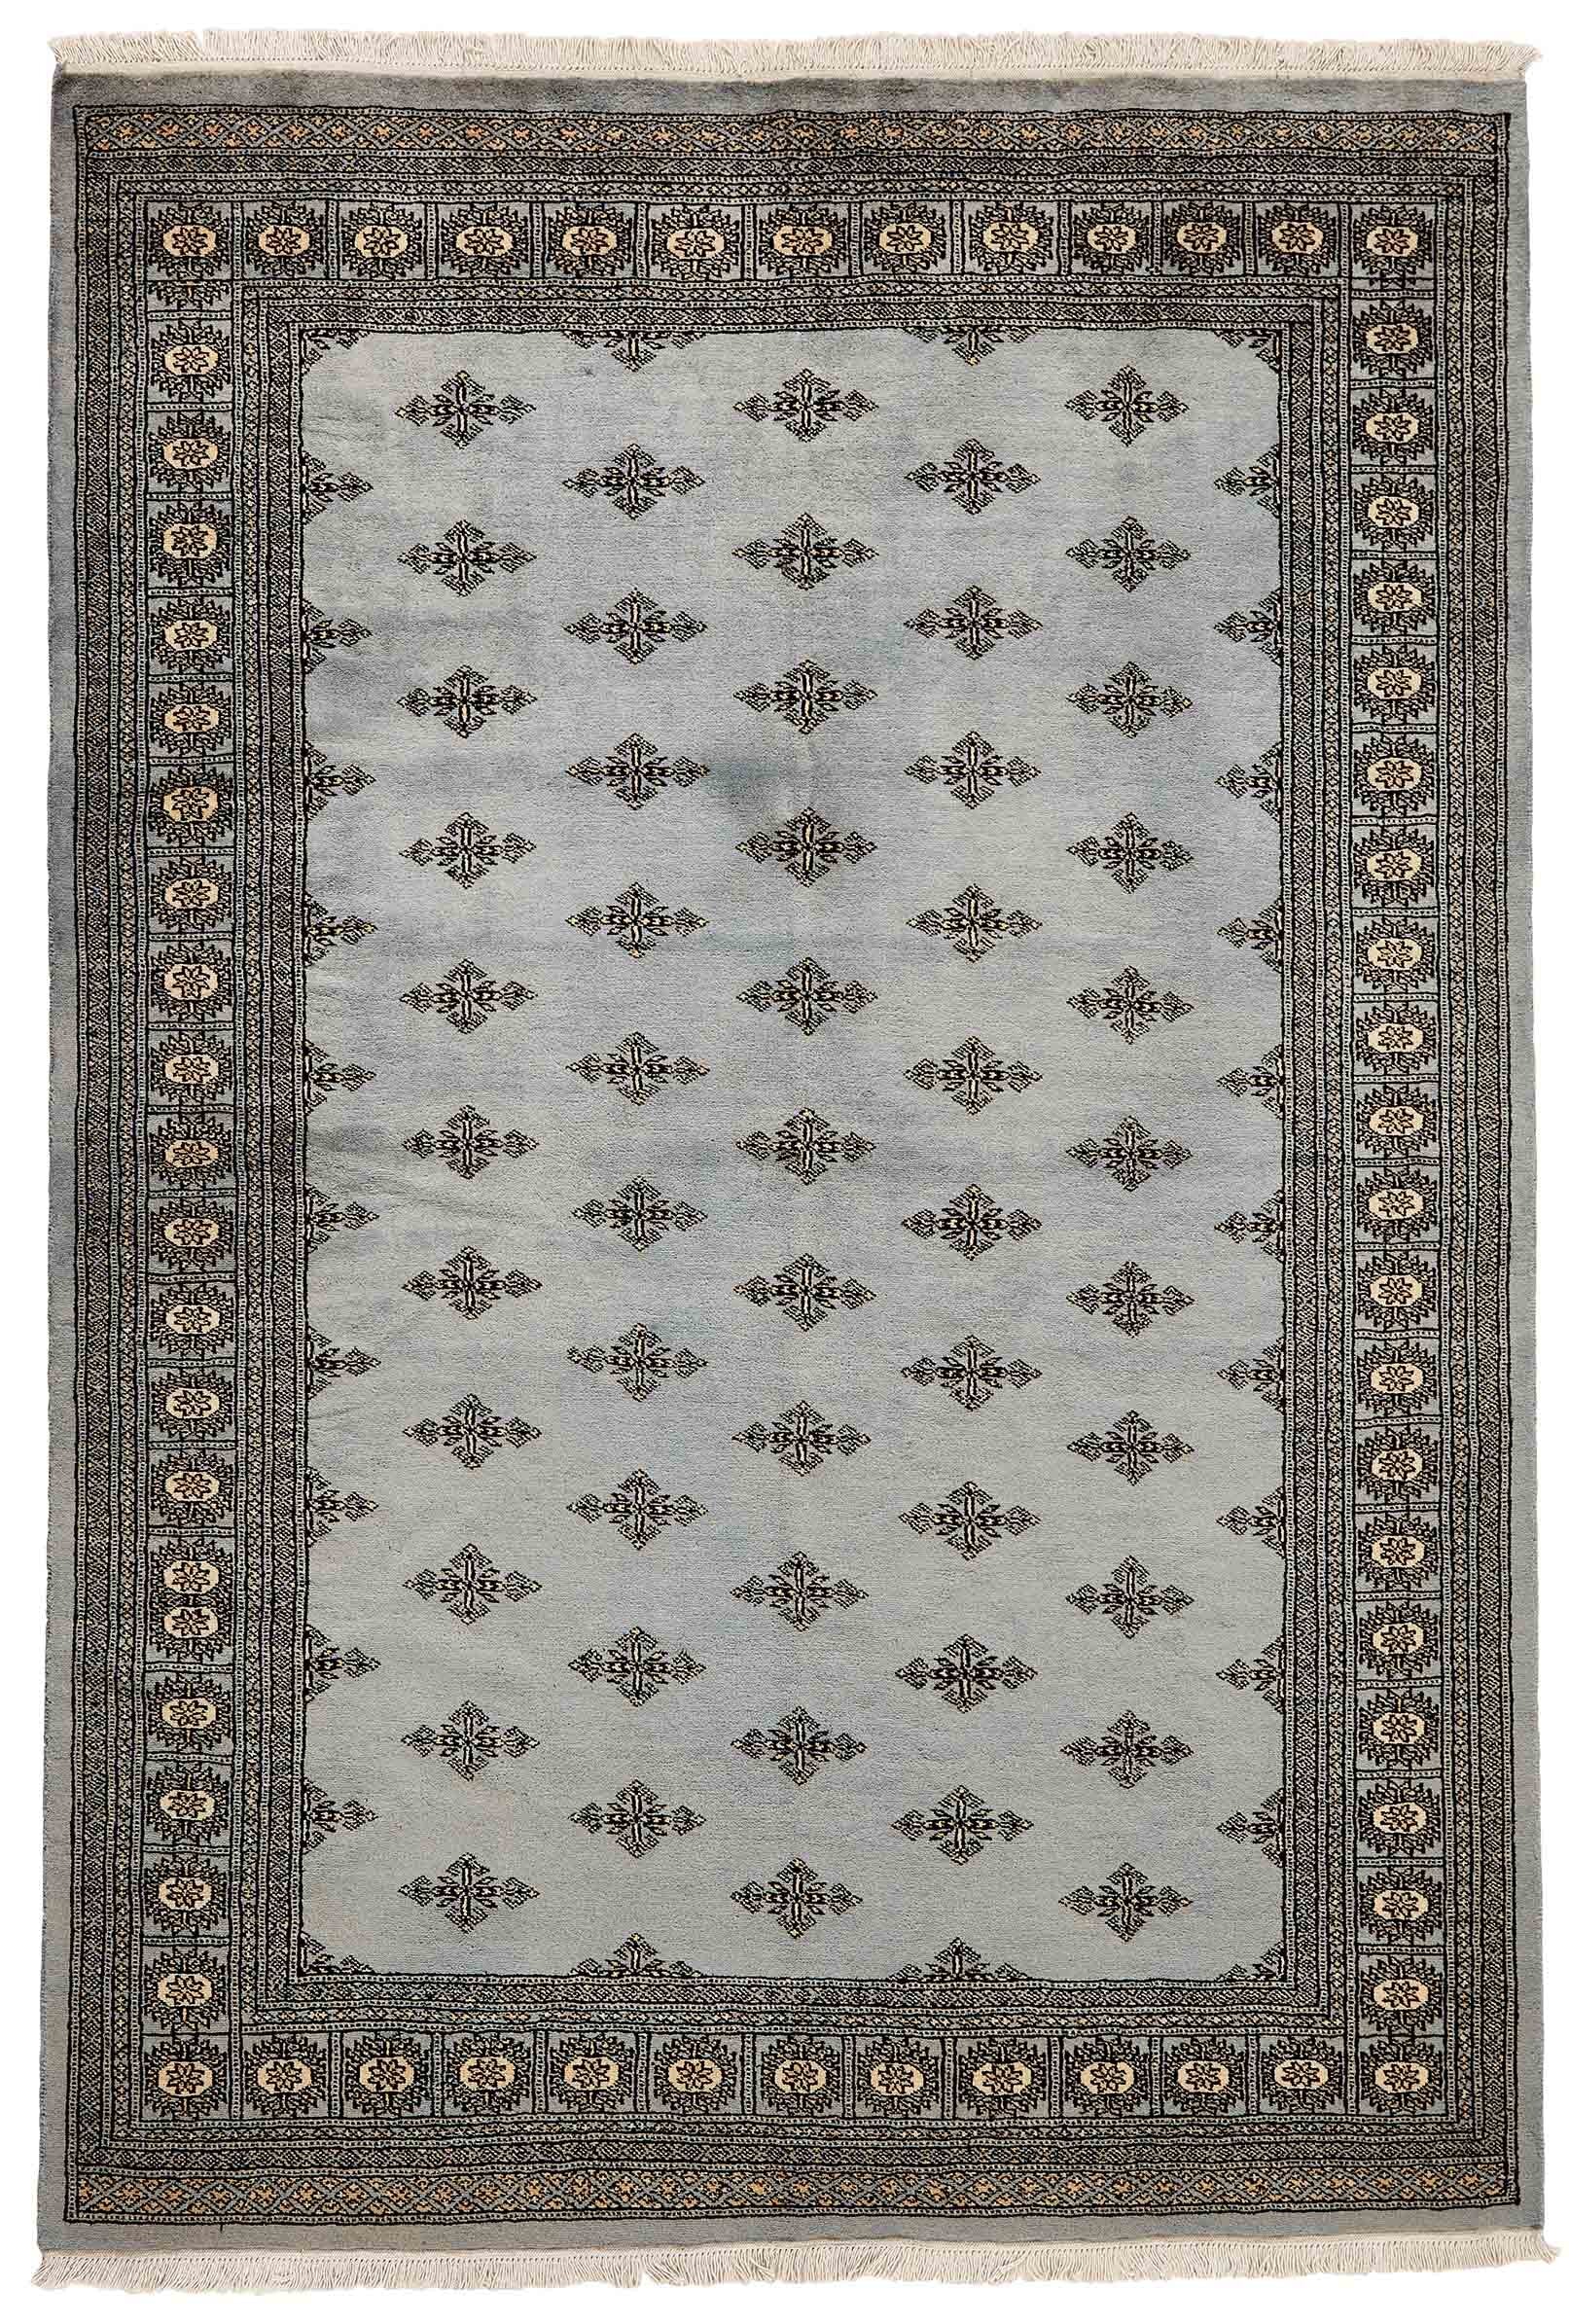 Grey Oriental rug with traditional bordered pattern